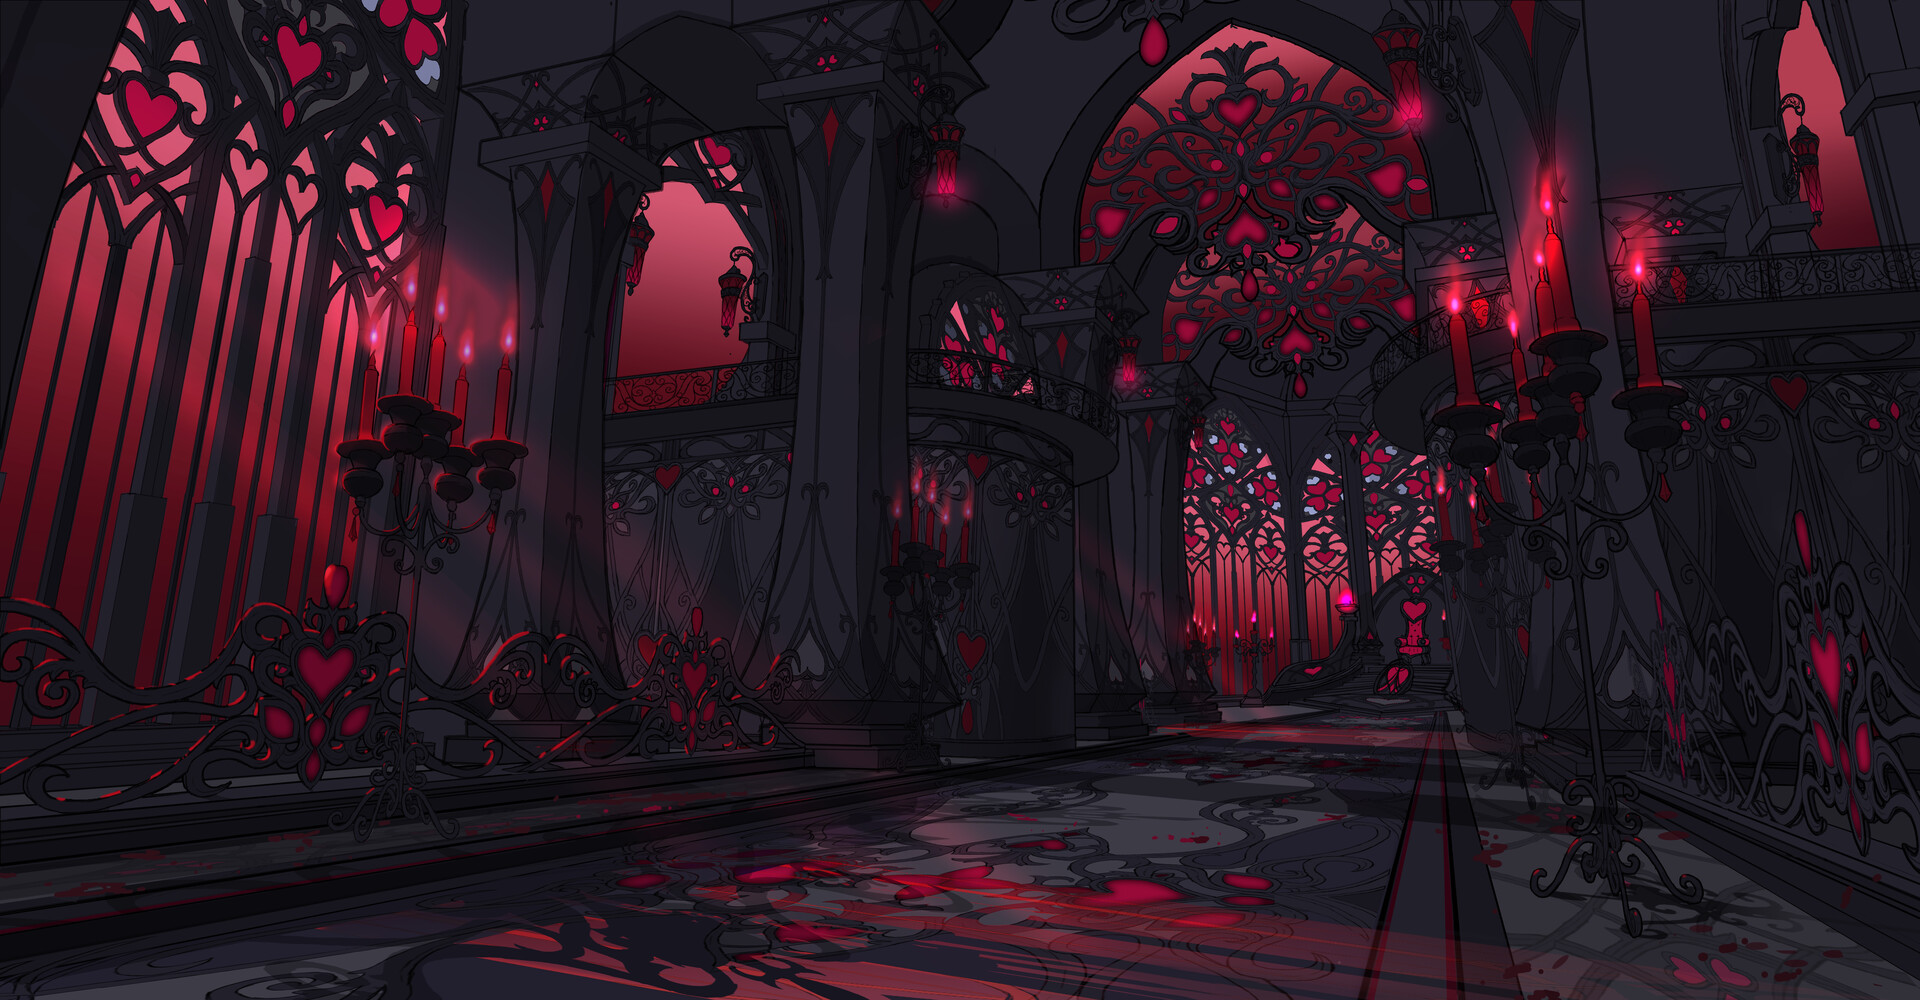 Liuying JP Digital Art Fantasy Art Heart Stained Glass Cathedral Red Candles Hallway Throne 1920x1000